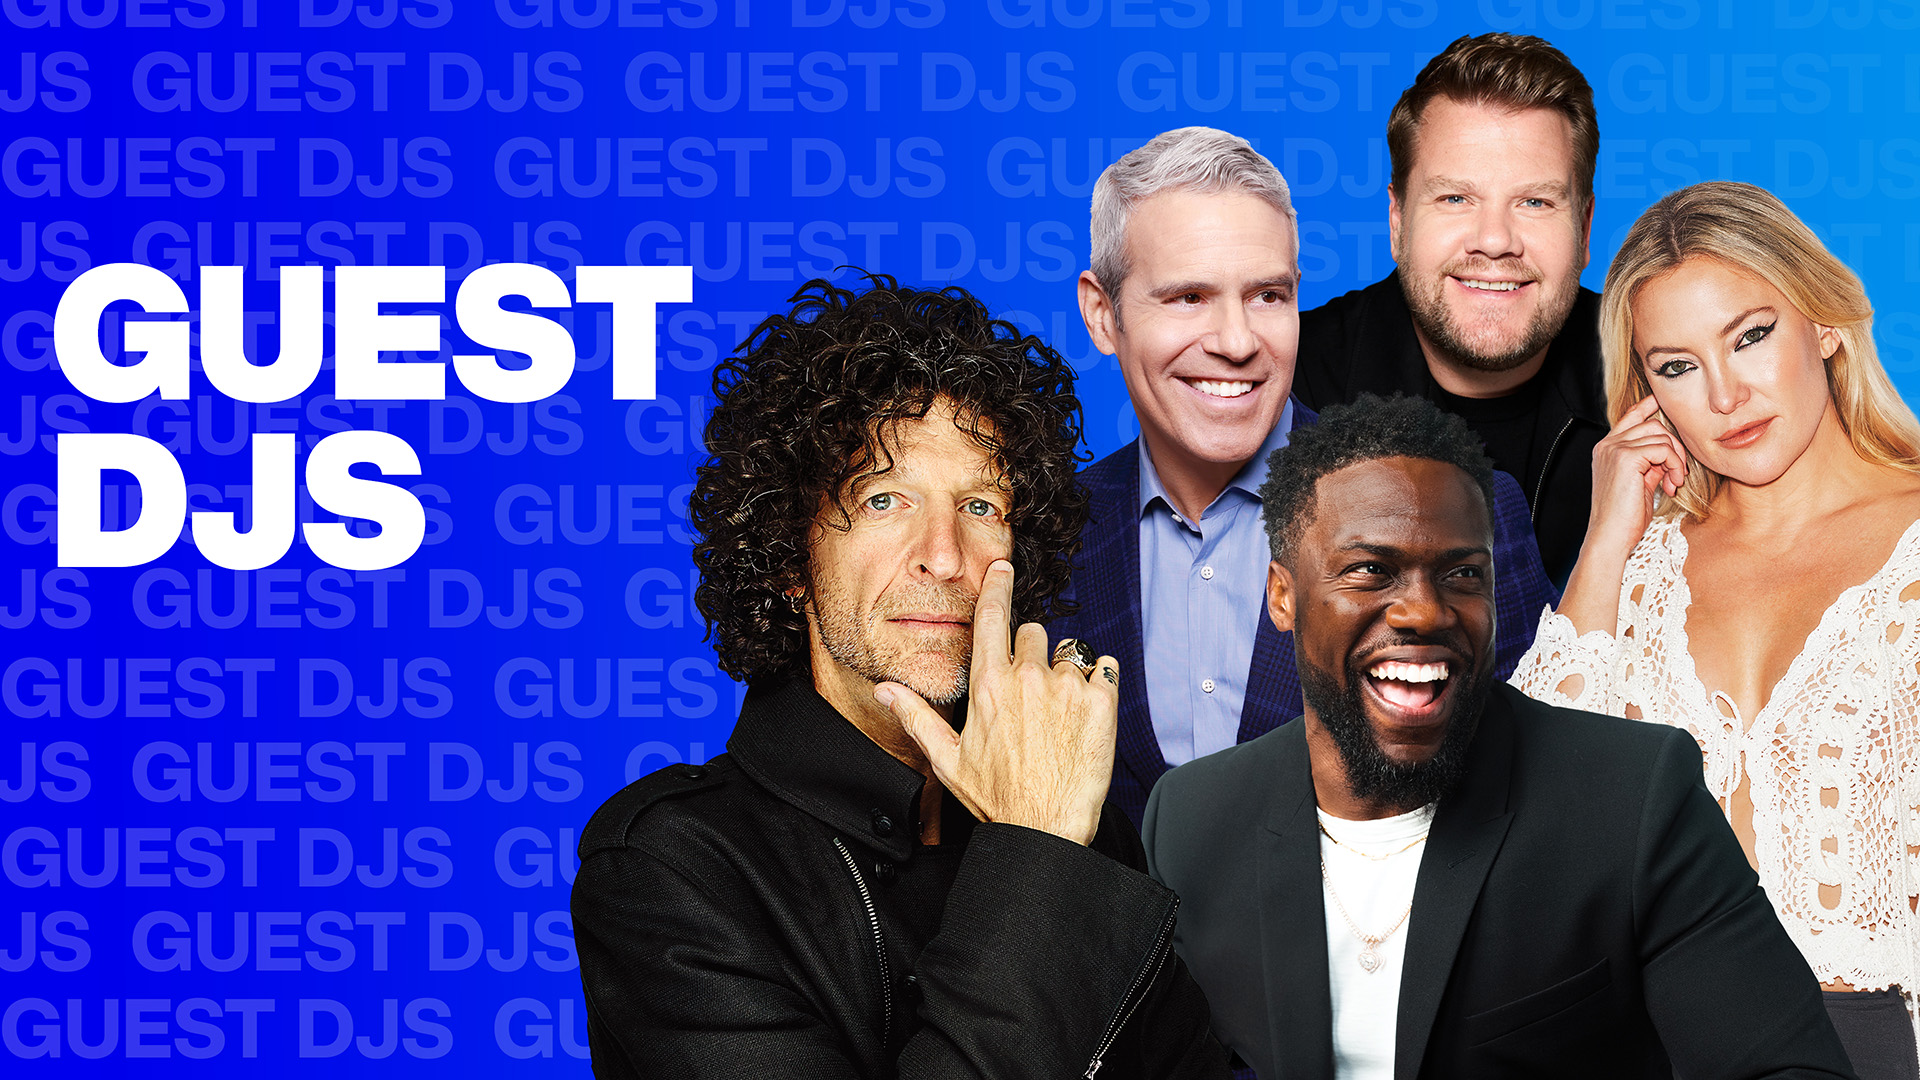 SiriusXM Guest DJs - Howard Stern, Andy Cohen, Kevin Hart, James Corden, and Kate Hudson